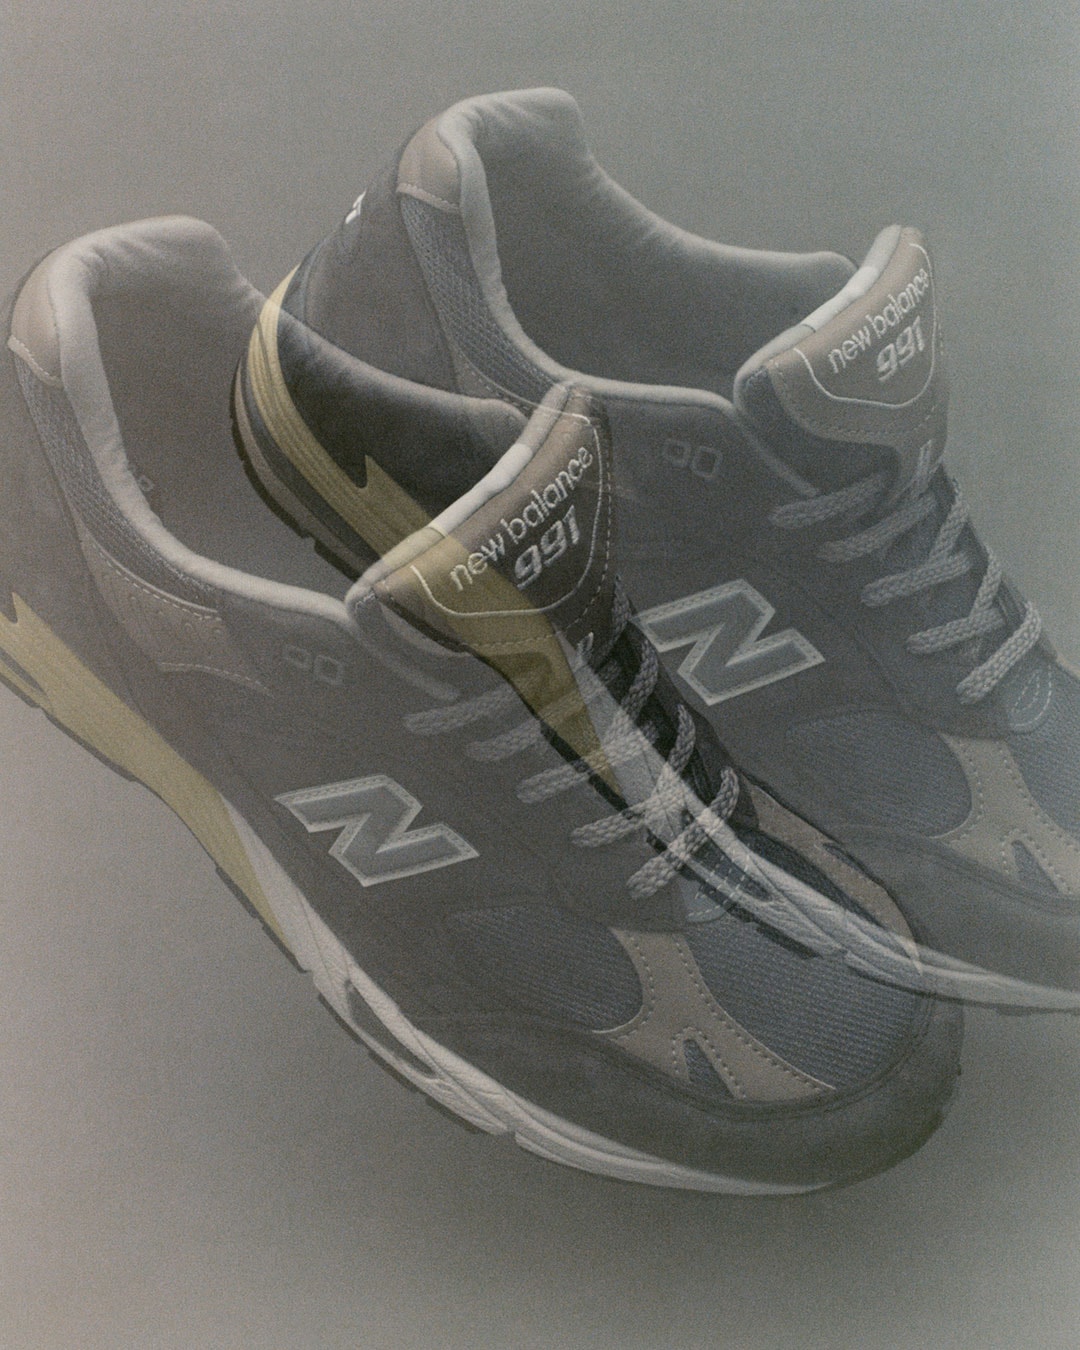 Dover Street Market New Balance 991 Collaboration Release Where to buy